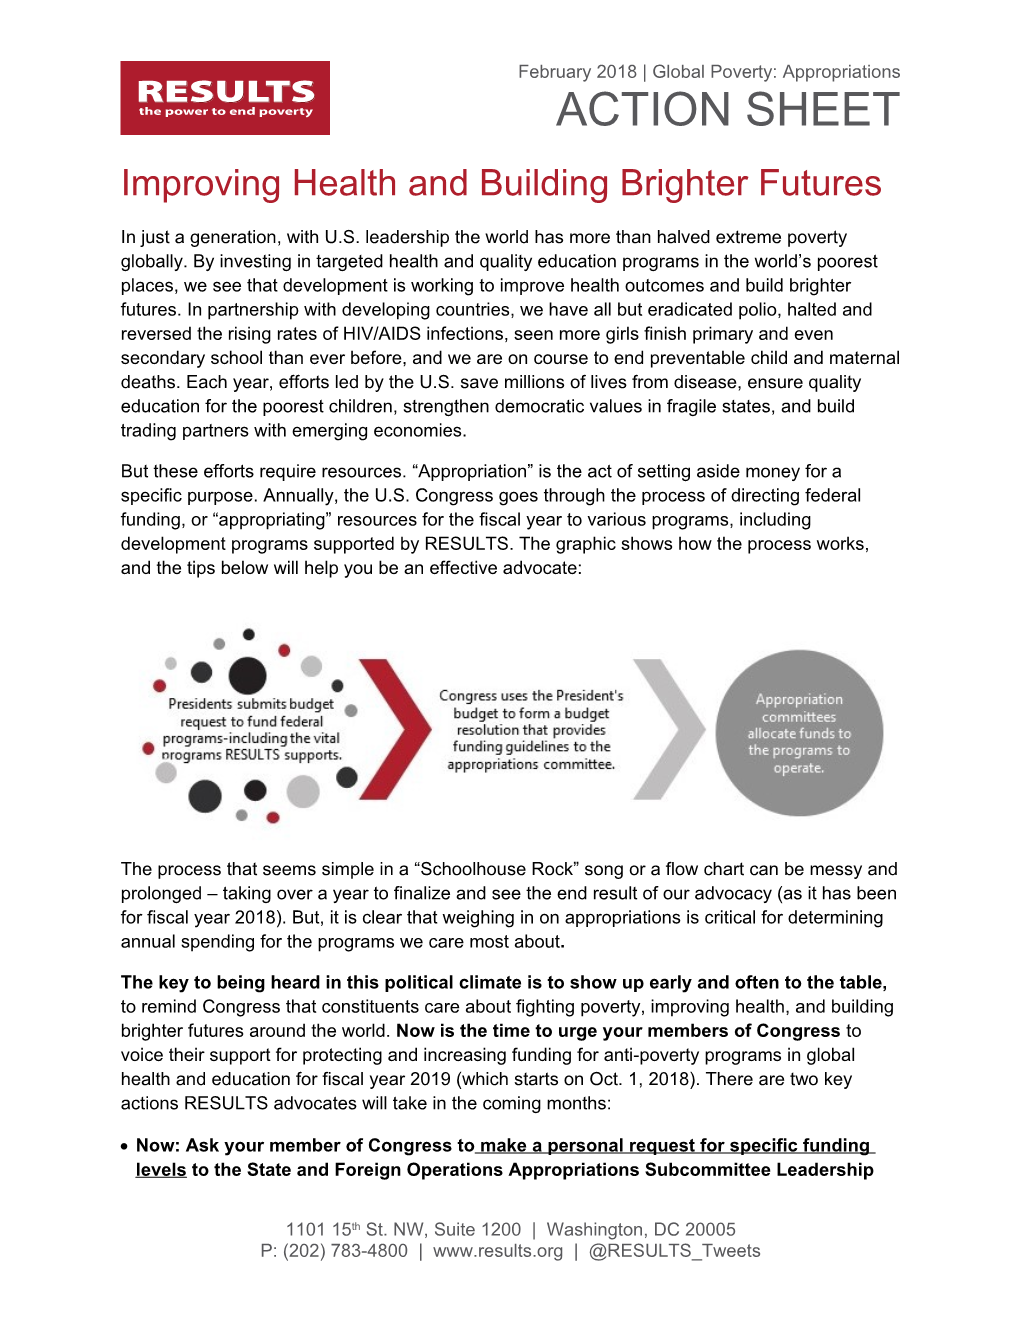 Improving Health and Building Brighter Futures